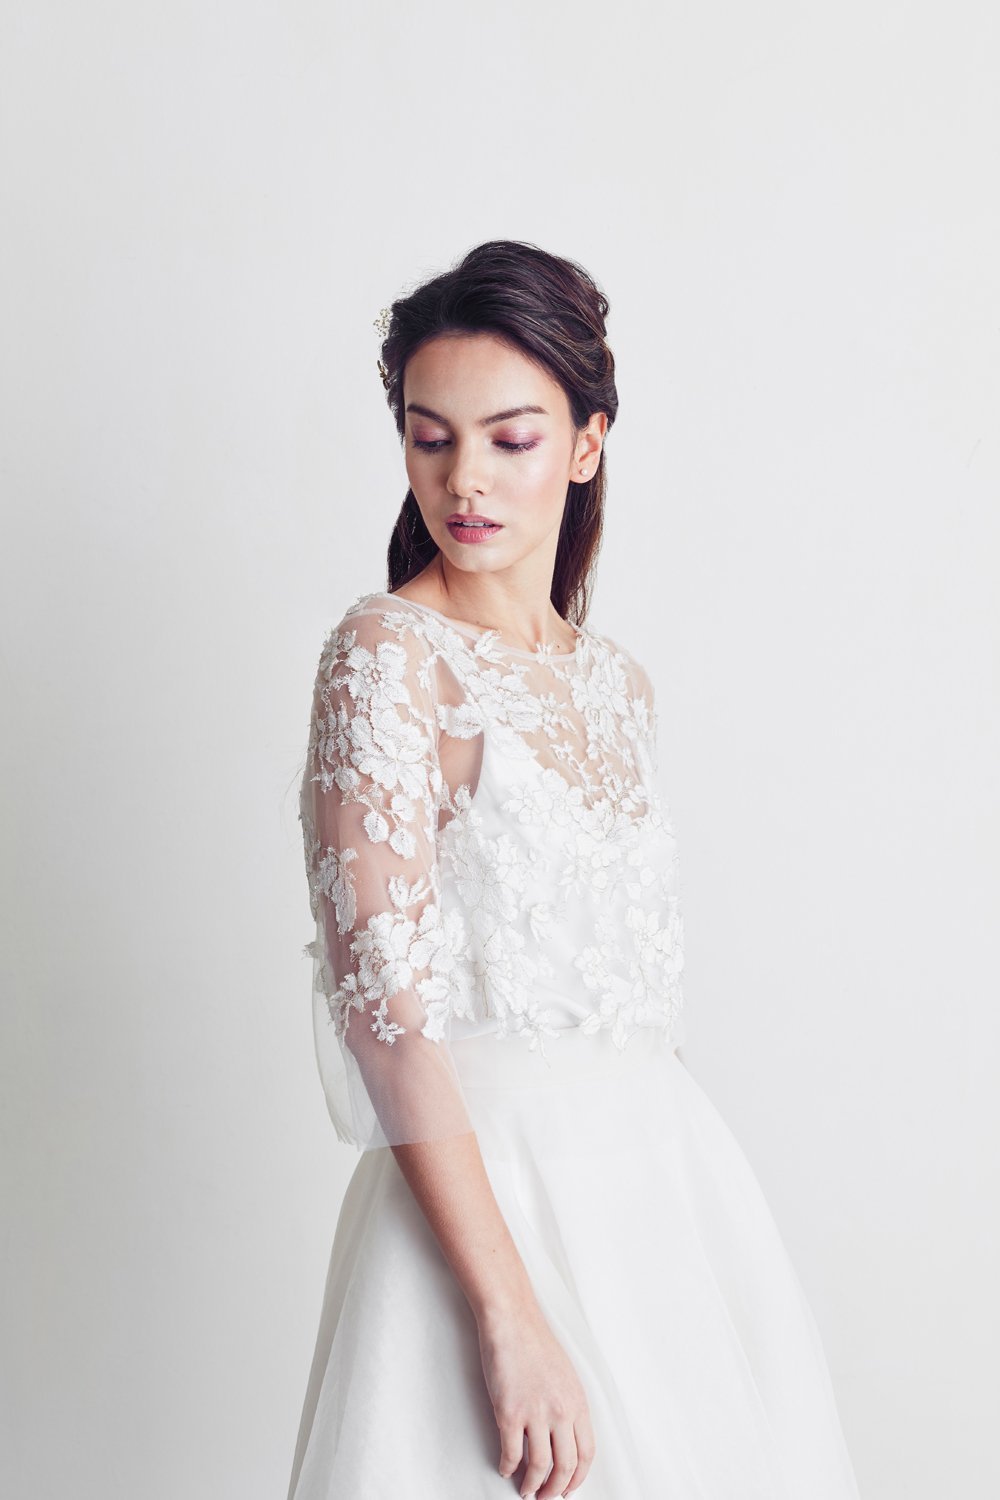 Style: HILARY French Metallic Lace Appliqué Top Peony Rice